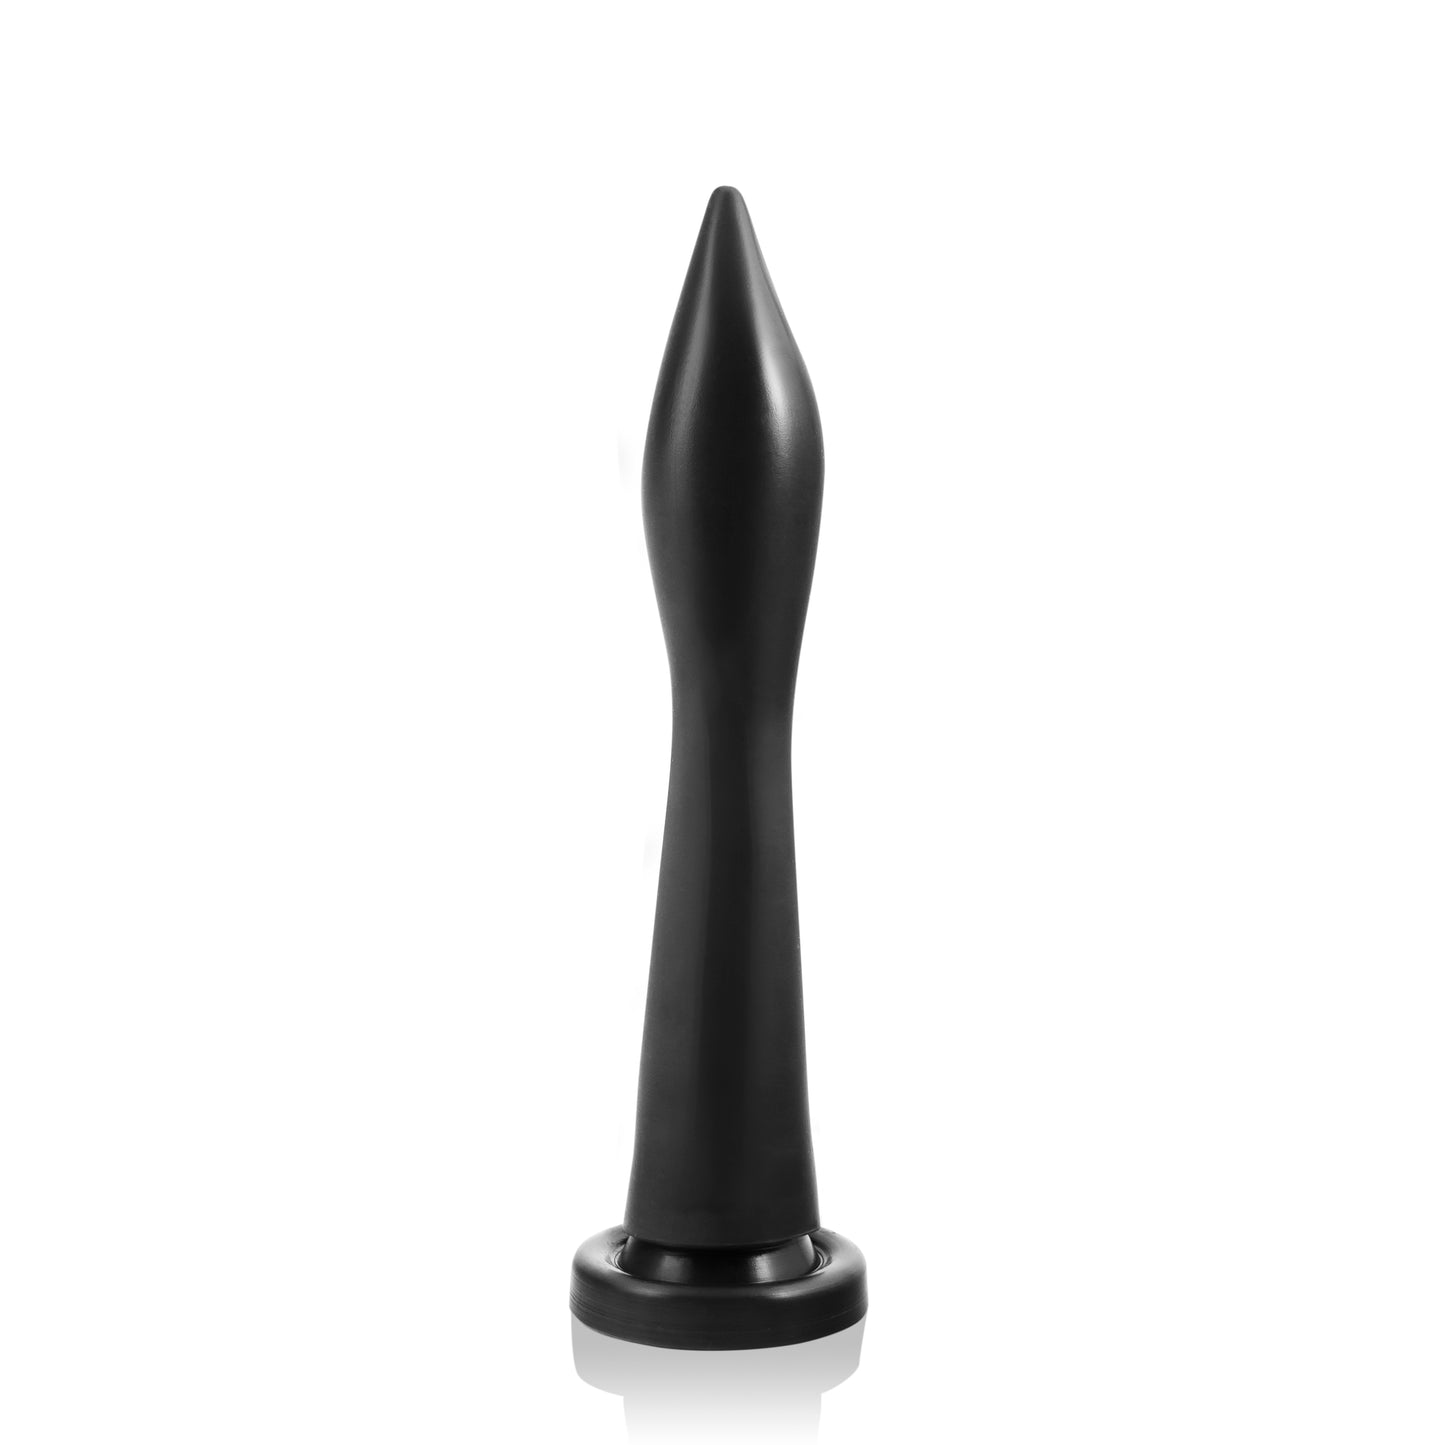 Goose Small w/ Suction Black - Just for you desires